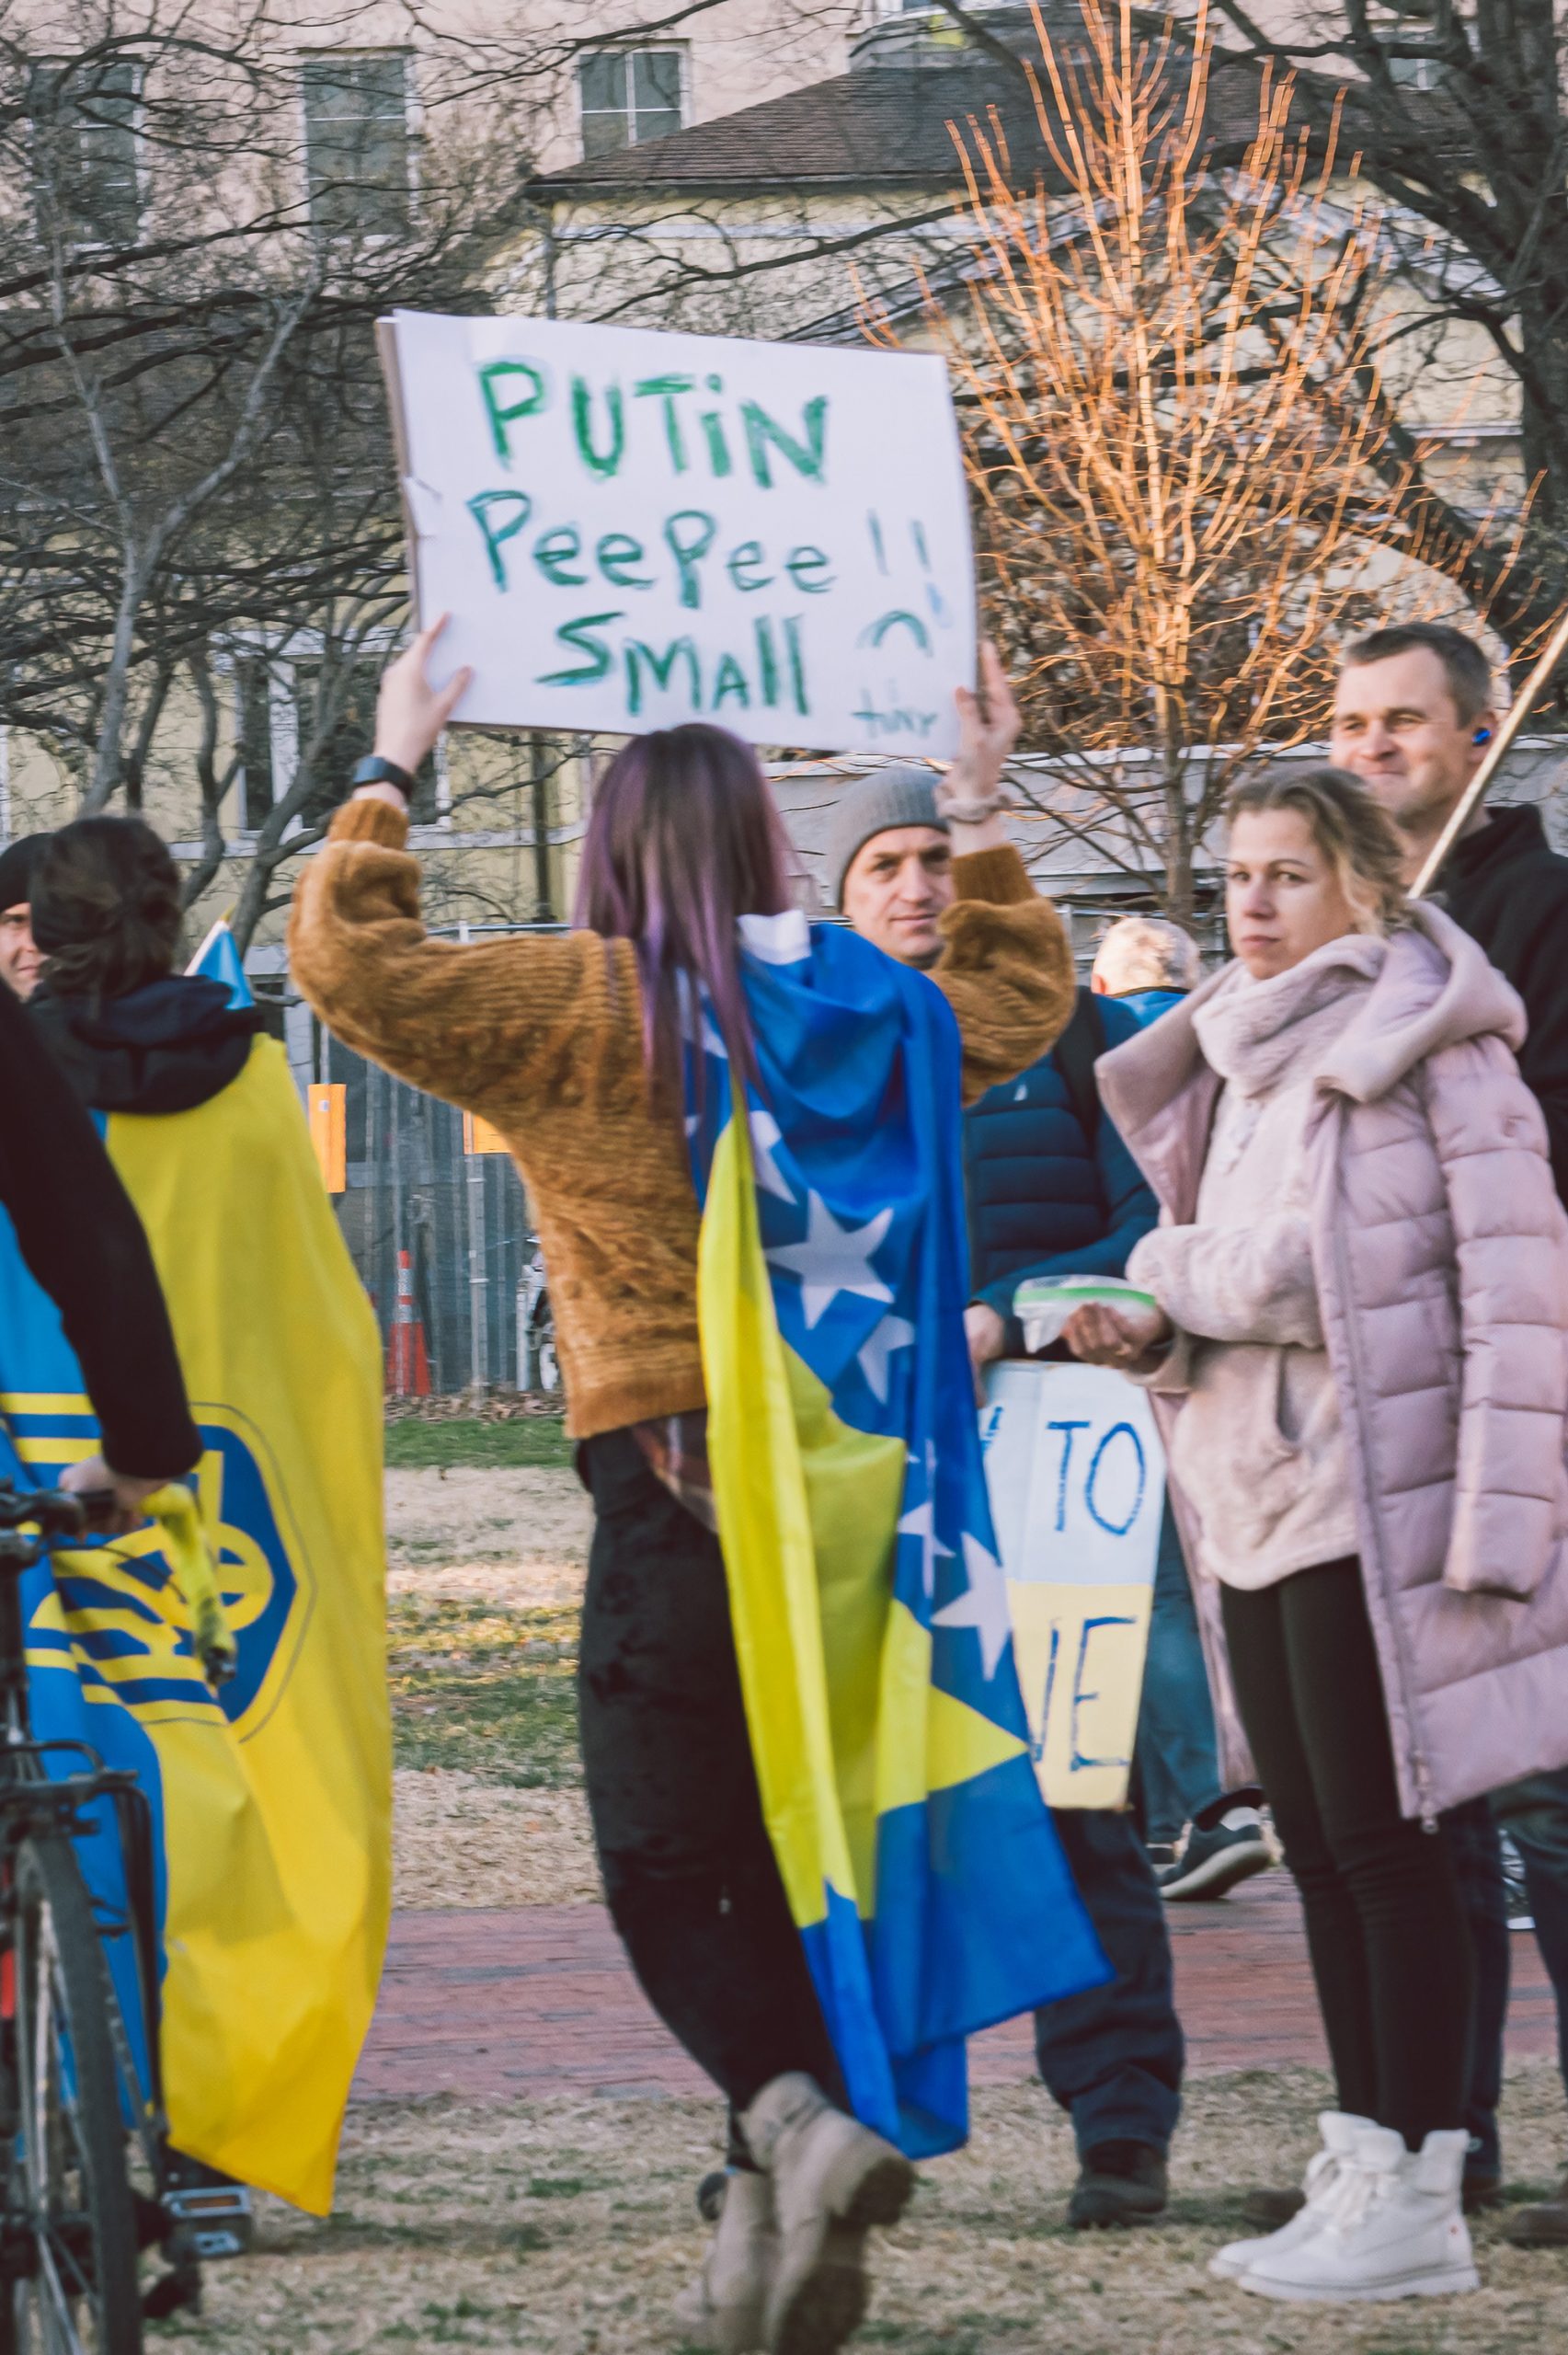 Woman at protest with sign that says PUTIN PEEPEE SMALL.